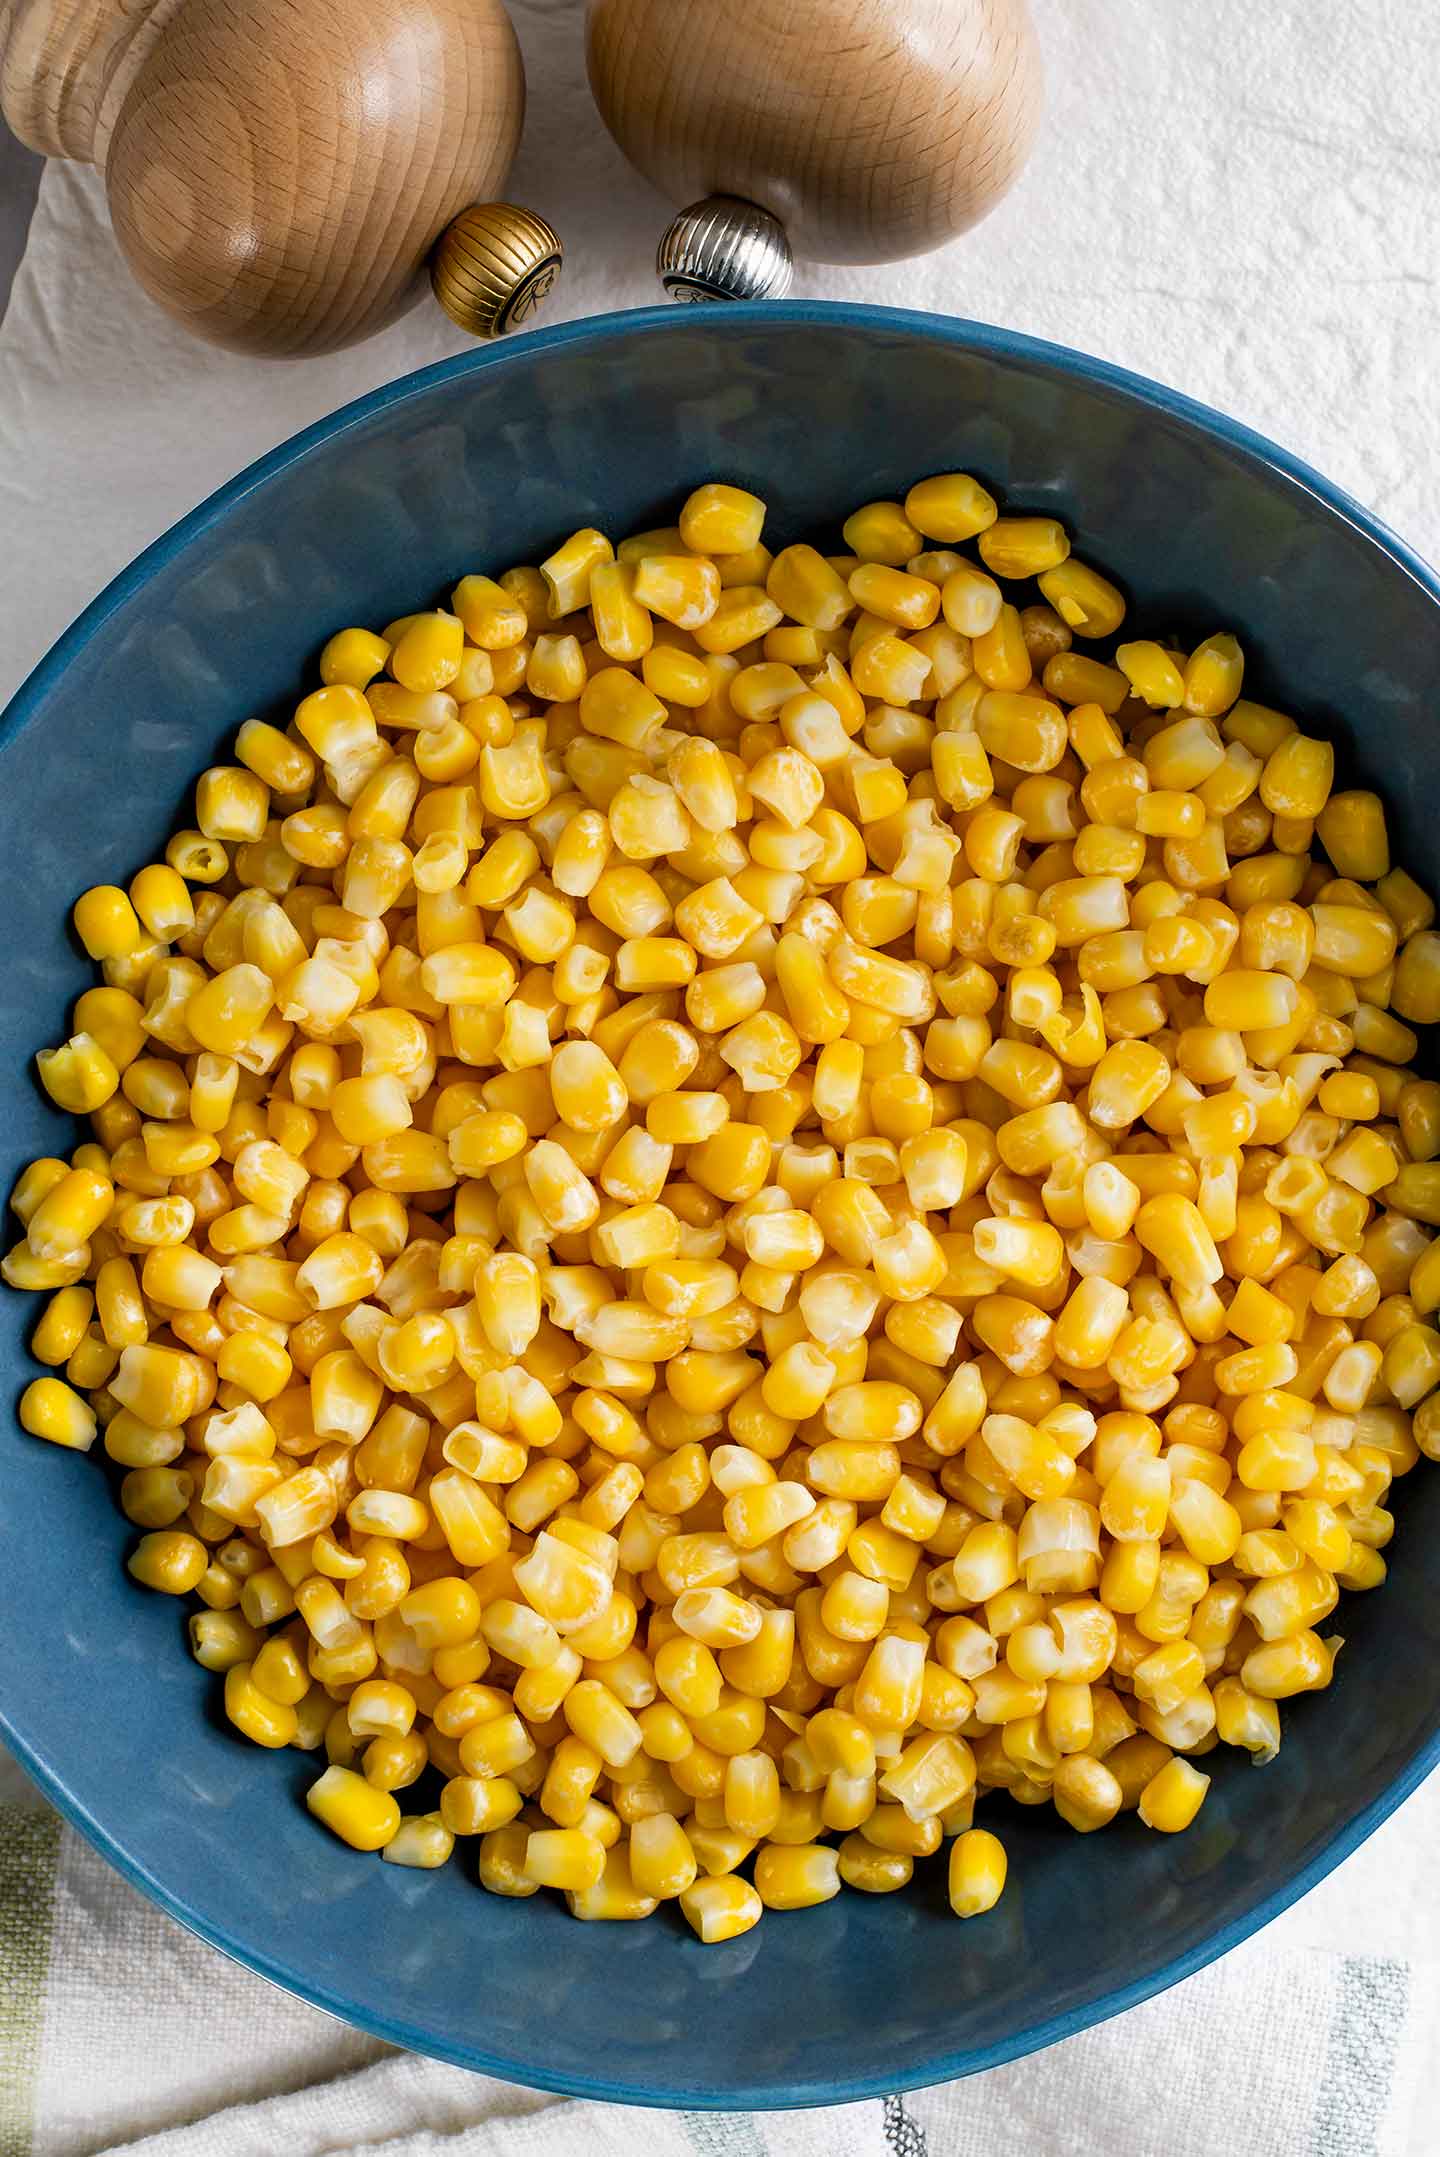 Top down view of yellow corn kernels in a serving bowl before being charred in the skillet. Salt and pepper shakers lay beside the bowl.